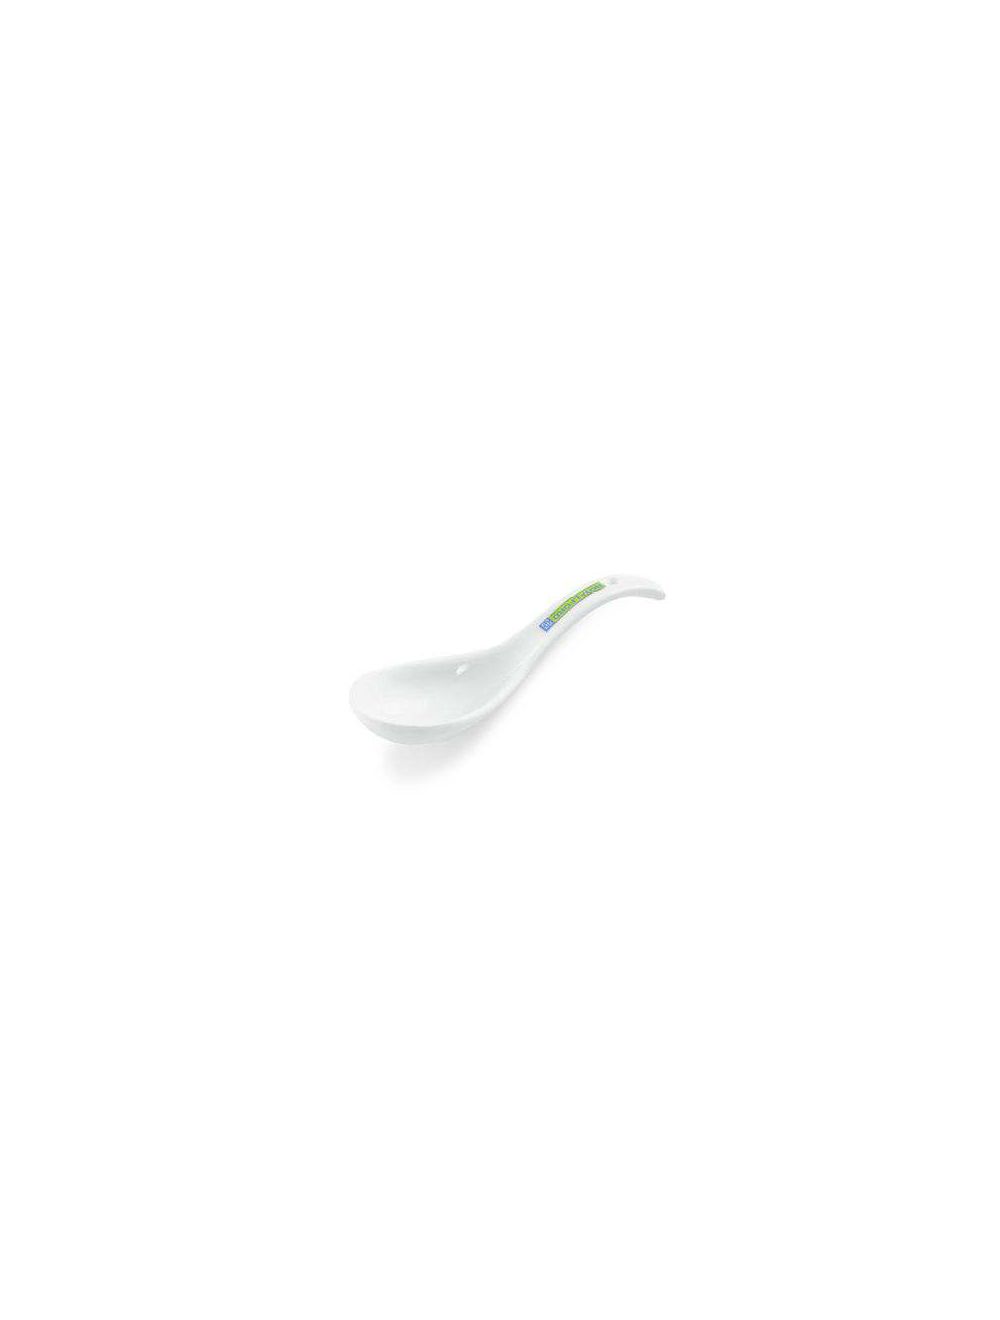 Royalford RF8006 Porcelain Soup Spoon, 3.5 Inch